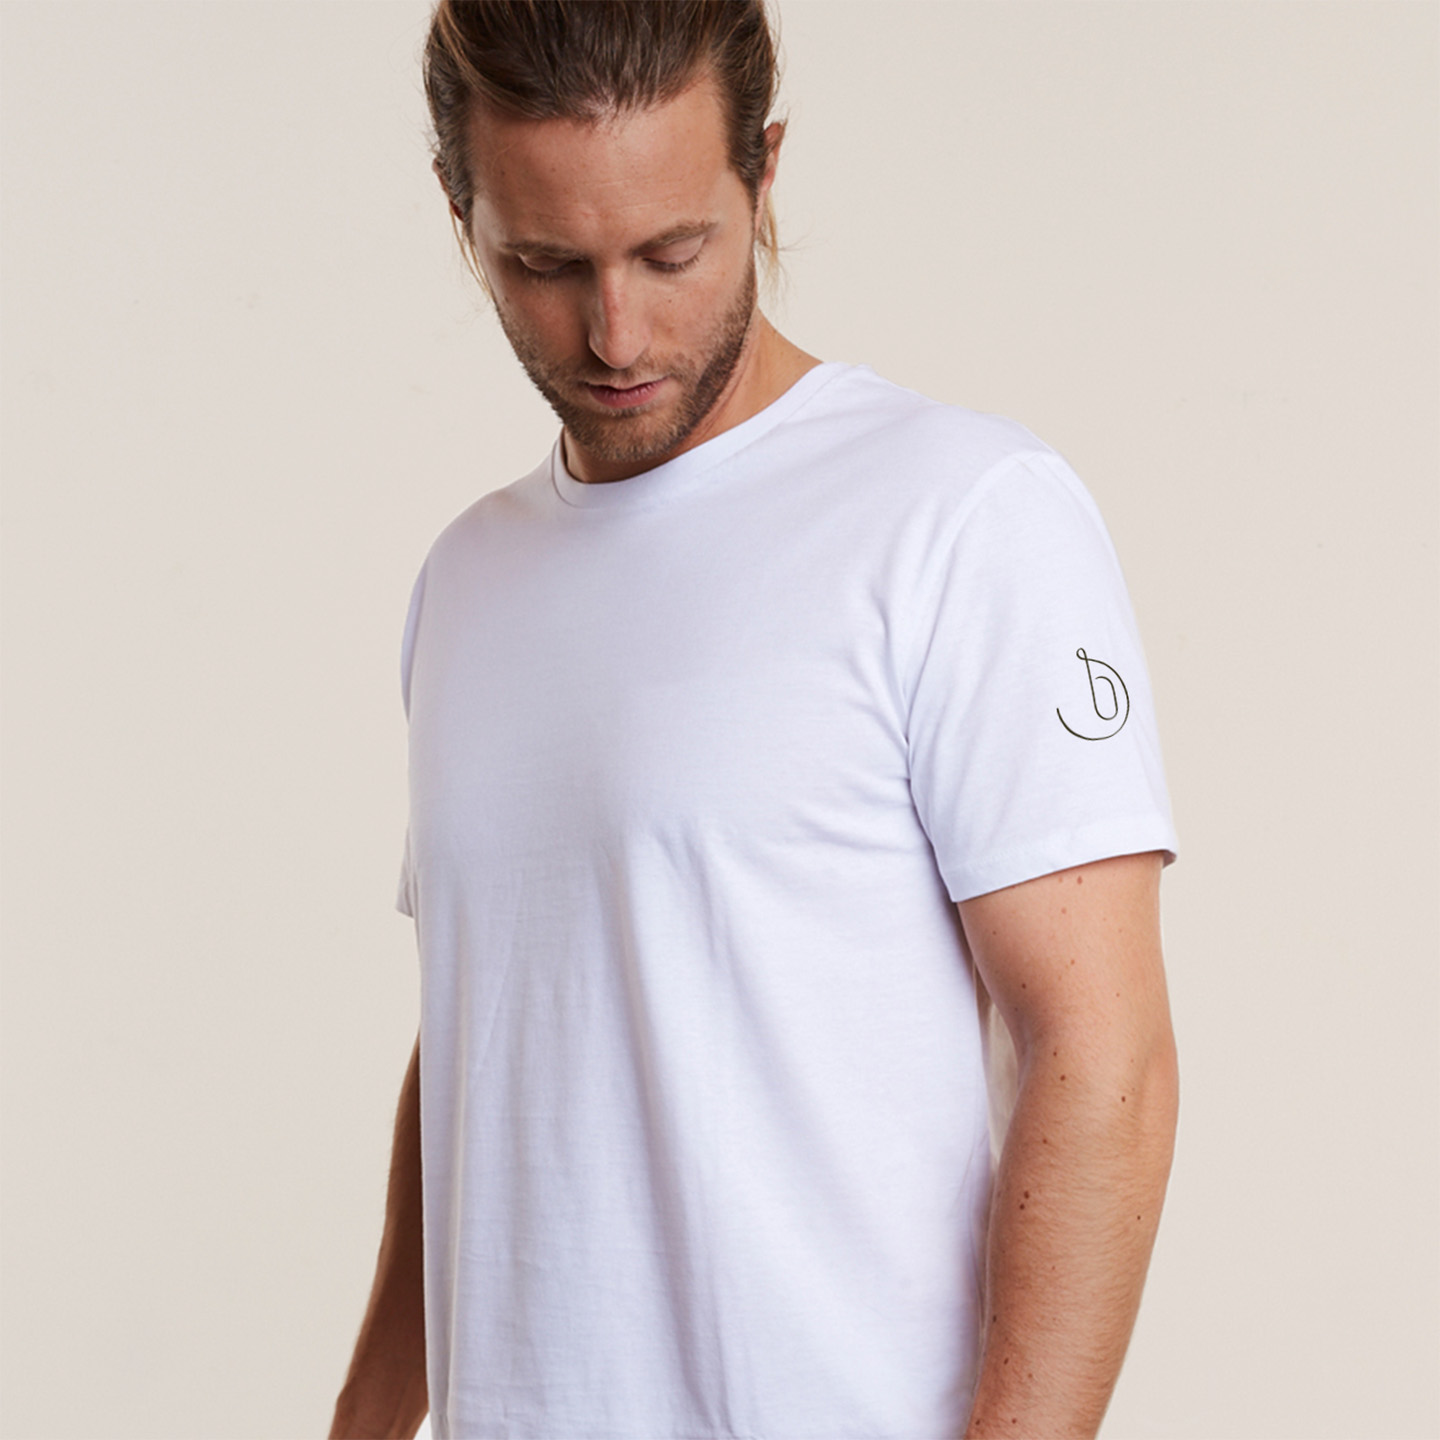 man with a branded t-shirt showcasing the monogram logo on his shoulder